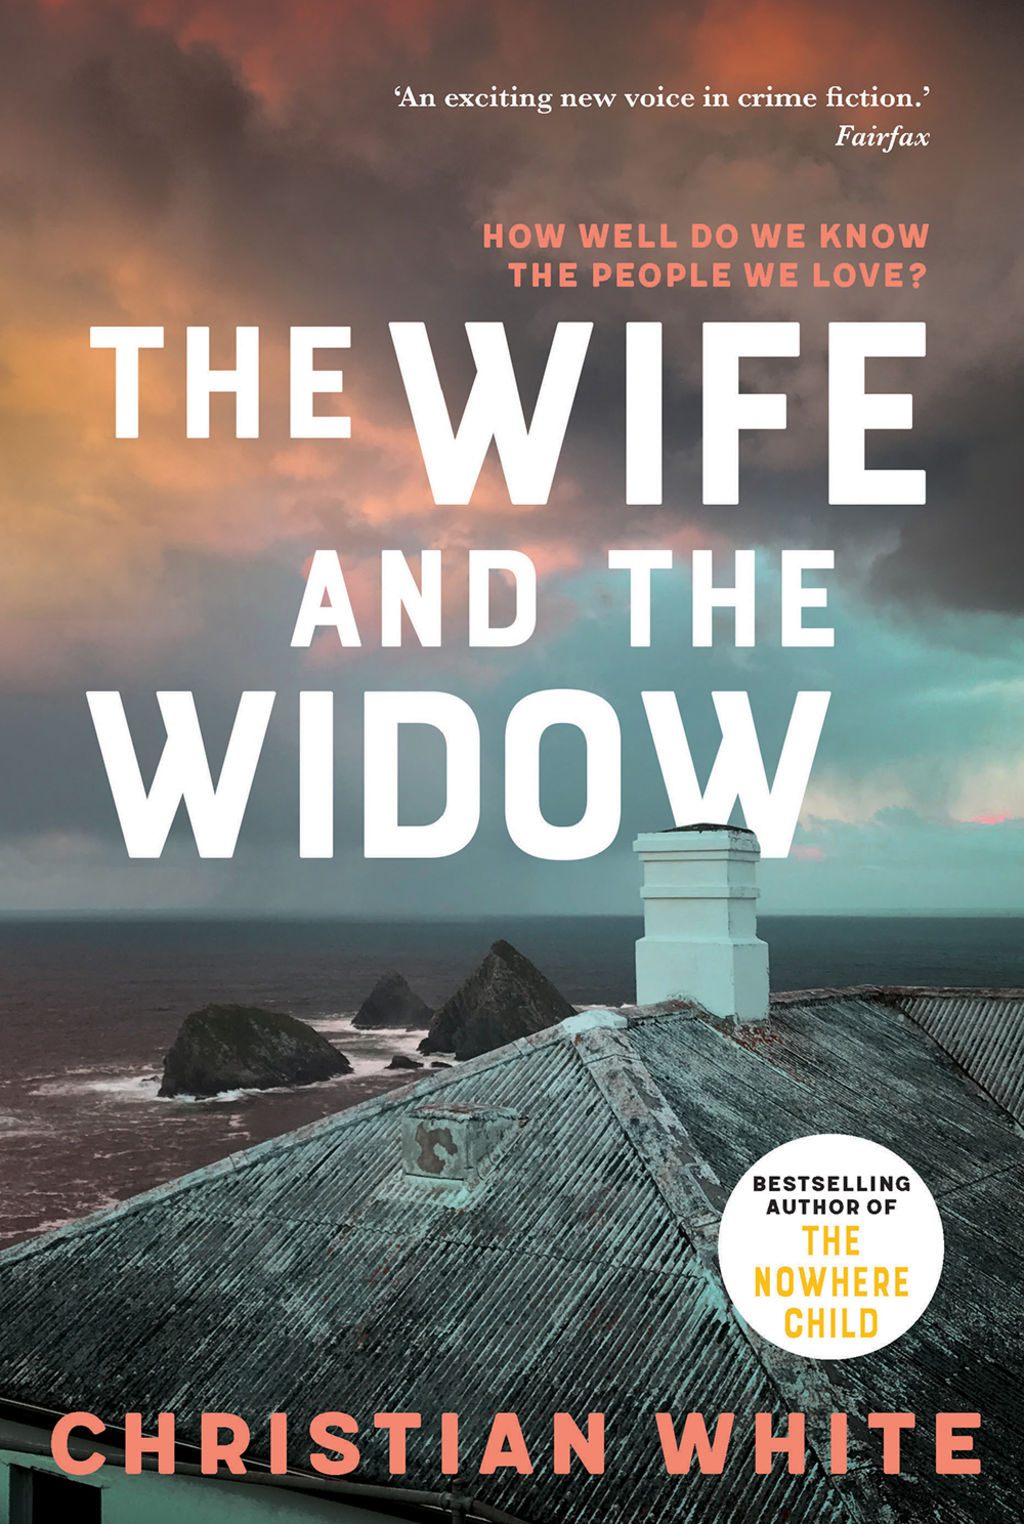 The Wife and the Widow by Christian Wife (Affirm Press): the November Review Book Club read.